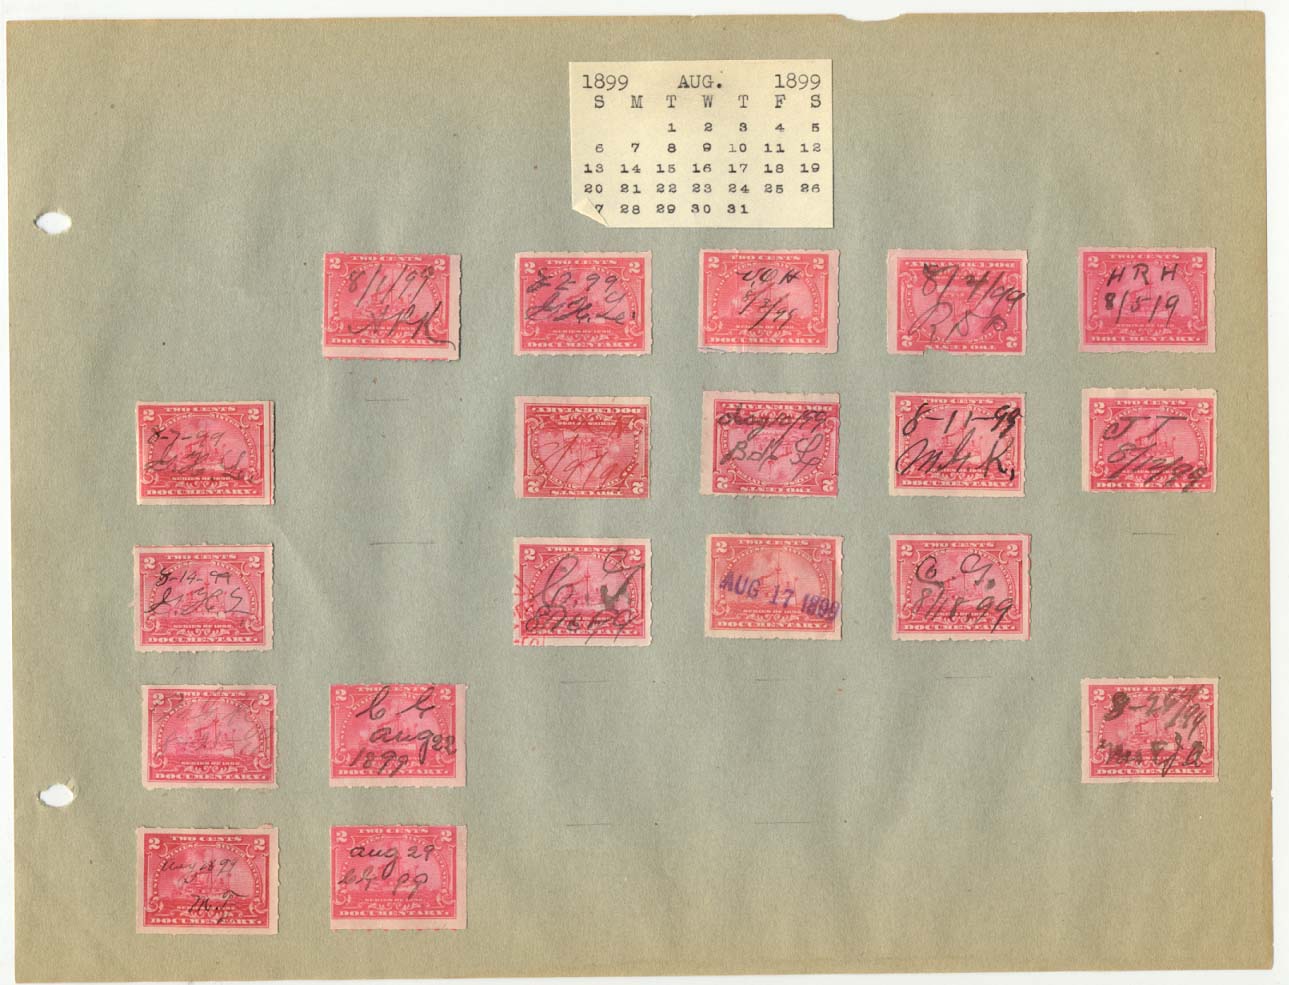 Revenue Stamp Collection August 1899